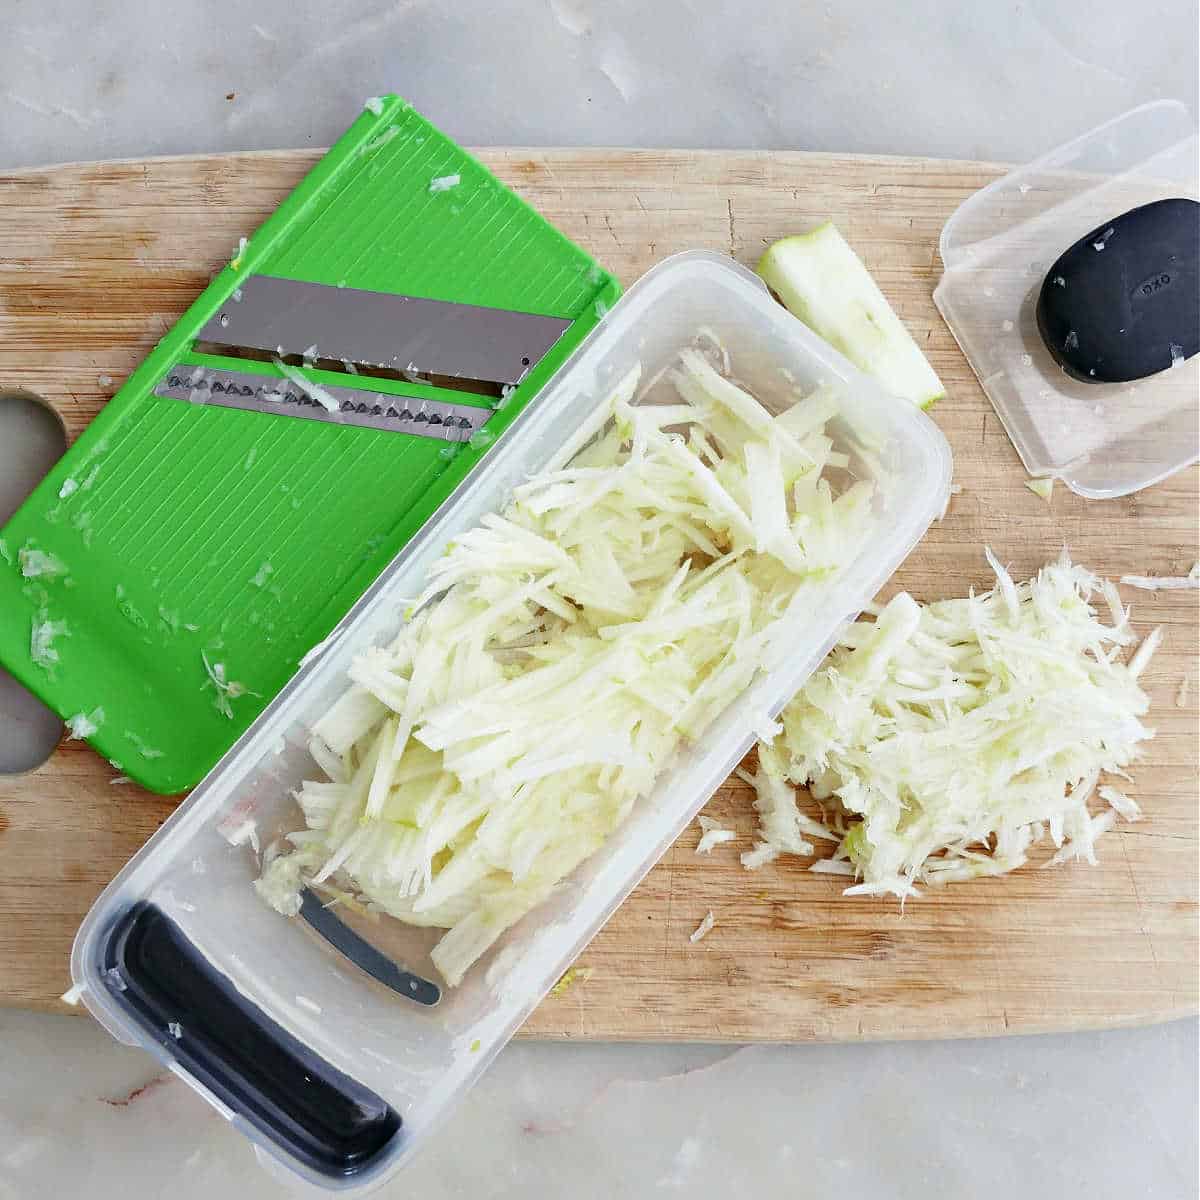 Shredded fennel in a grating container on a cutting board.